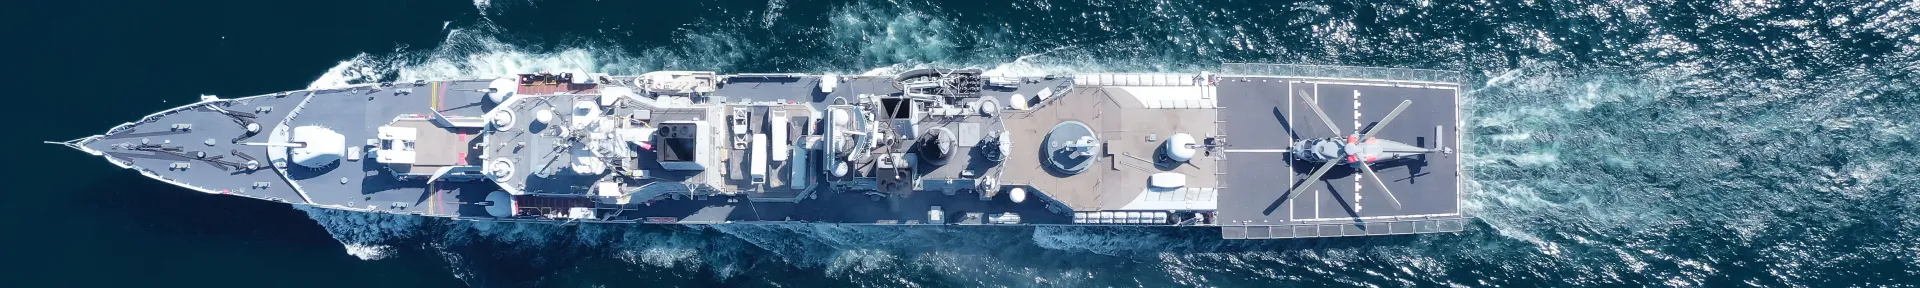 Royal Navy ship from above